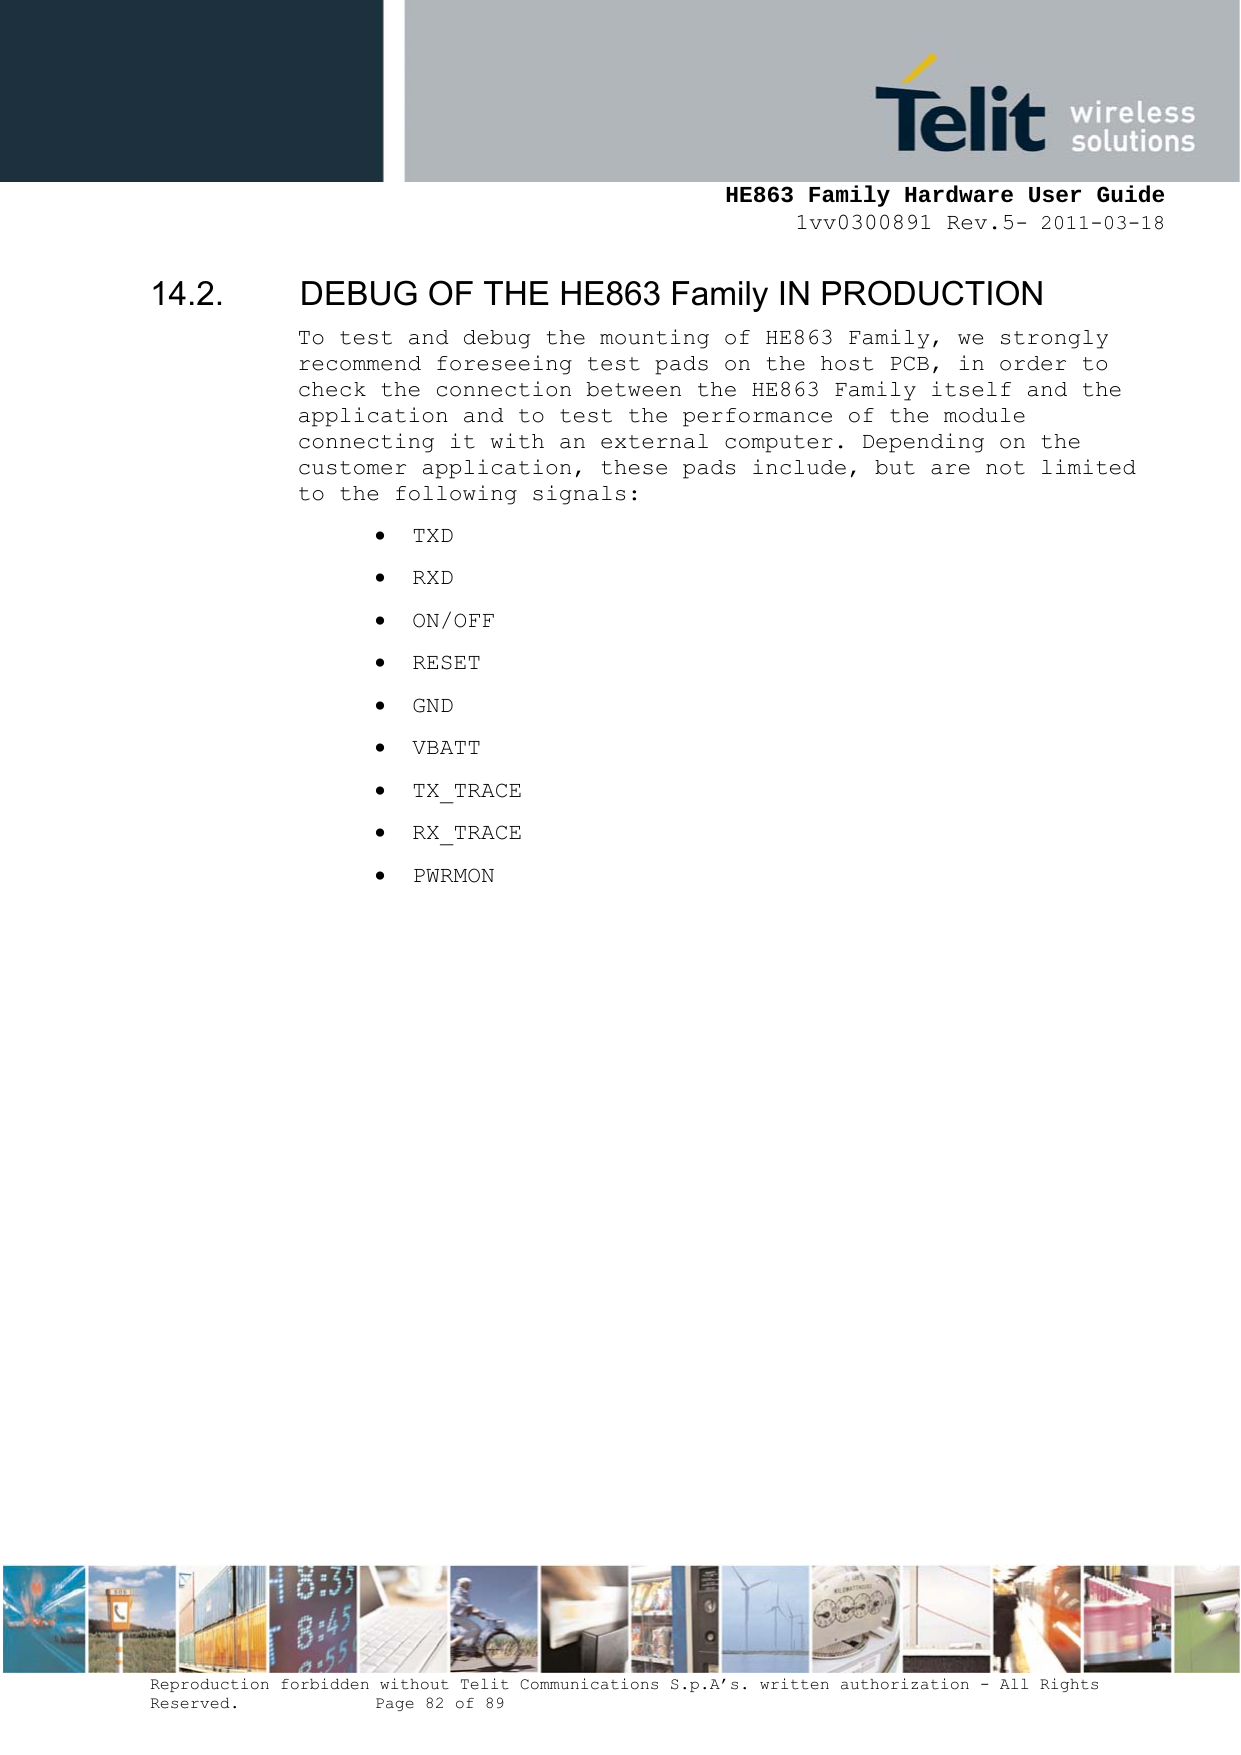     HE863 Family Hardware User Guide 1vv0300891 Rev.5- 2011-03-18    Reproduction forbidden without Telit Communications S.p.A’s. written authorization - All Rights Reserved.    Page 82 of 89  14.2.  DEBUG OF THE HE863 Family IN PRODUCTION To test and debug the mounting of HE863 Family, we strongly recommend foreseeing test pads on the host PCB, in order to check the connection between the HE863 Family itself and the application and to test the performance of the module connecting it with an external computer. Depending on the customer application, these pads include, but are not limited to the following signals:  TXD  RXD  ON/OFF  RESET  GND  VBATT  TX_TRACE  RX_TRACE  PWRMON                  